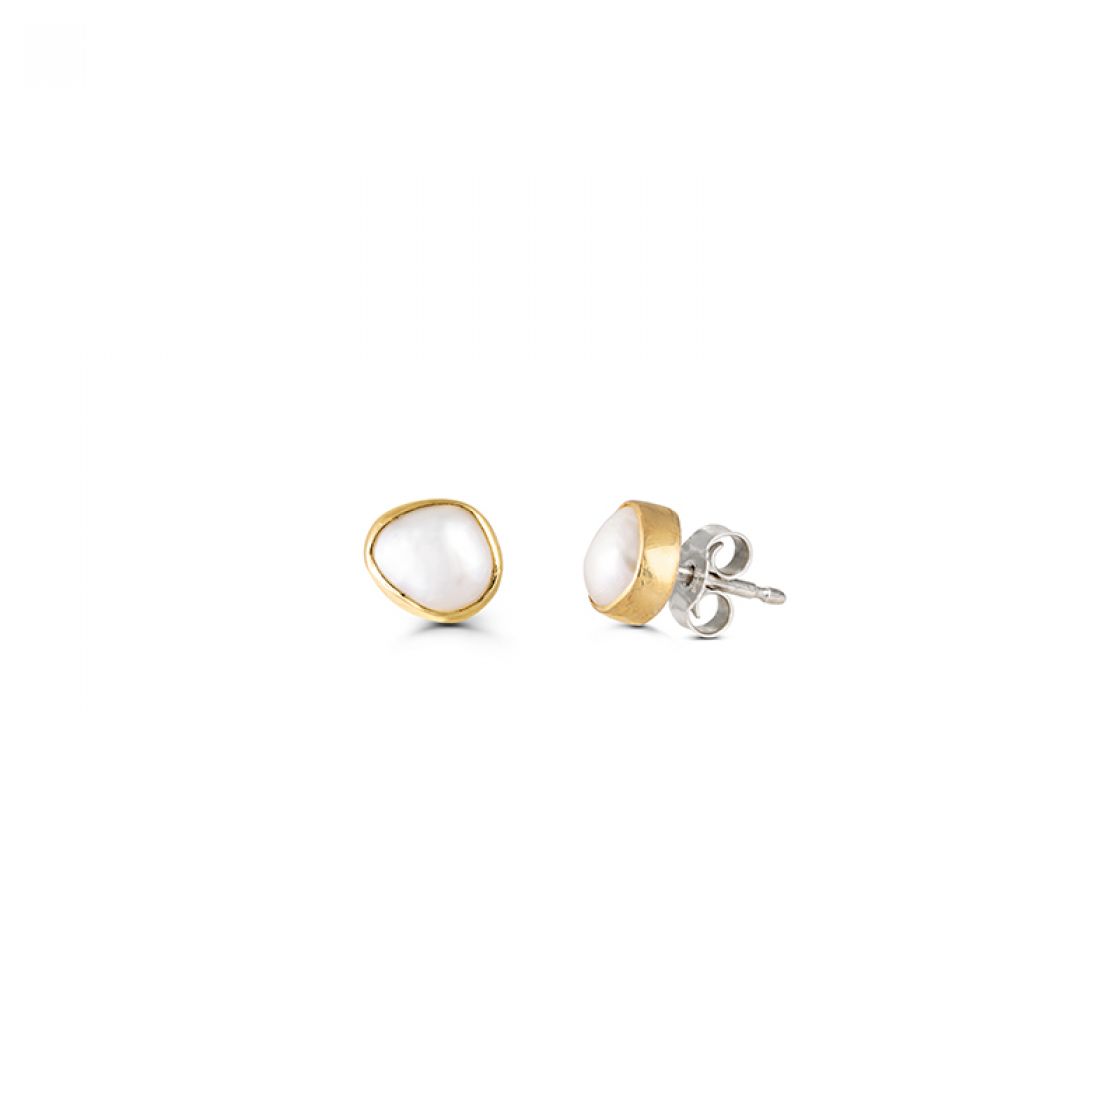 Bring a touch of uncomplicated elegance. 18kt gold bezels trace the shape of these cultured freshwater pearls with sterling silver backings.